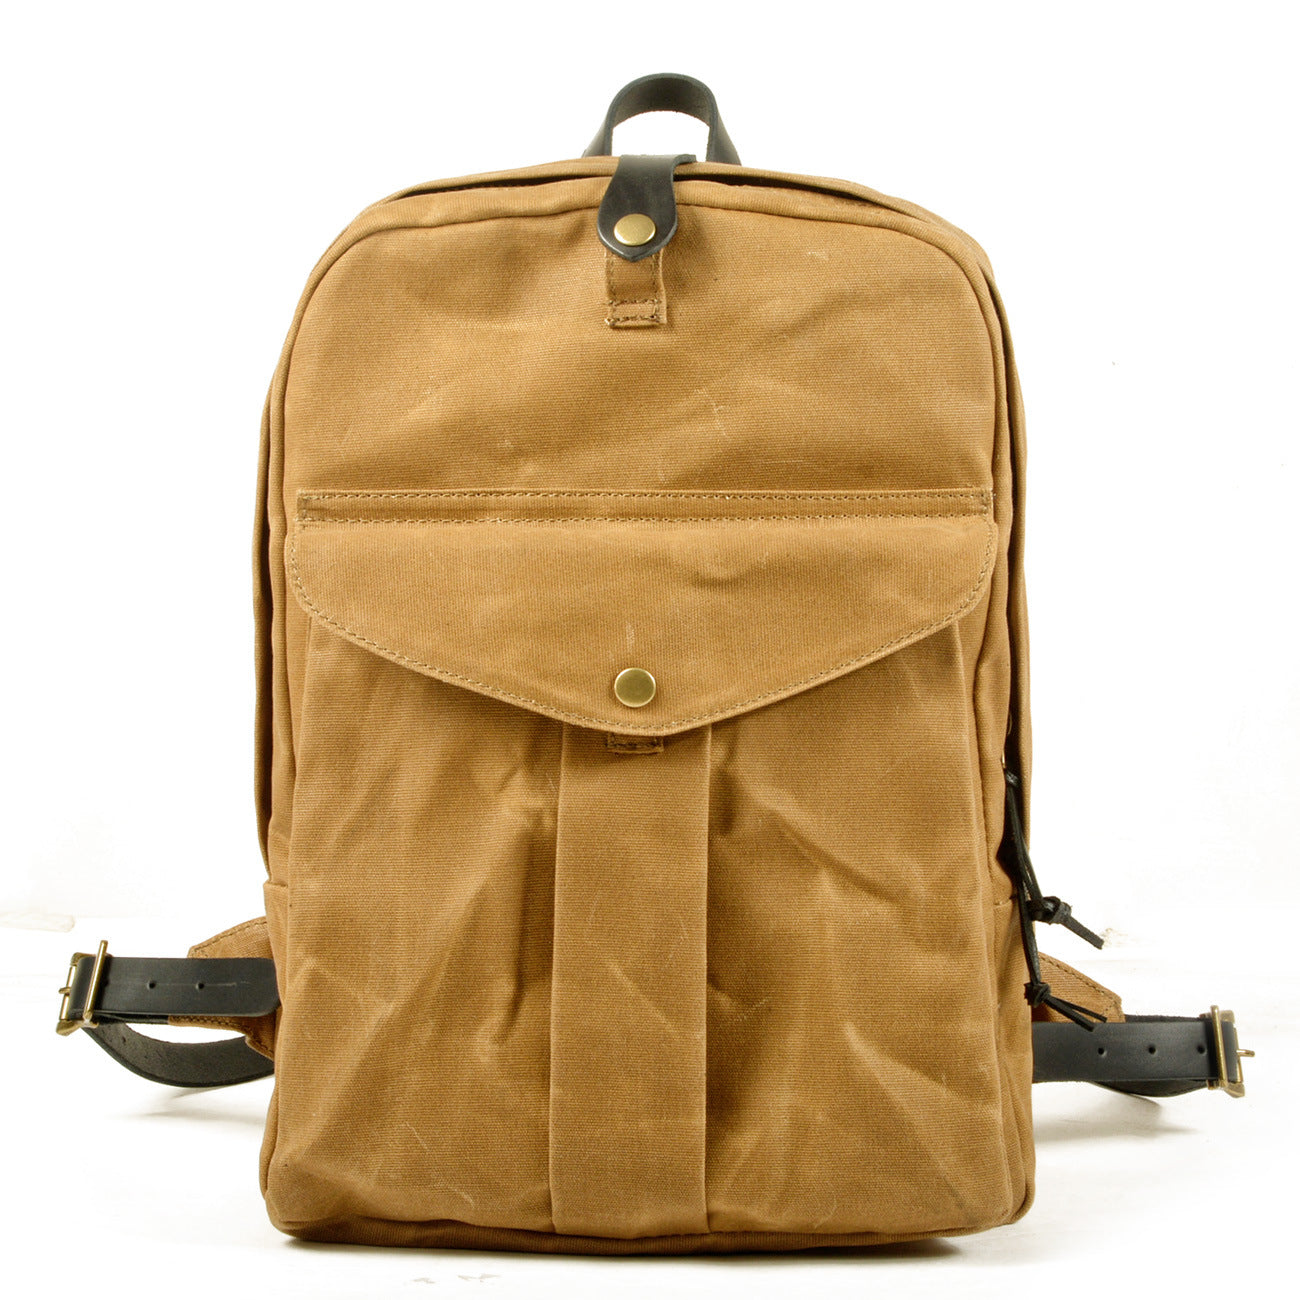 Vintage Water-resistant Canvas Hiking Backpack-Canvas Backpack-Khaki-Free Shipping Leatheretro